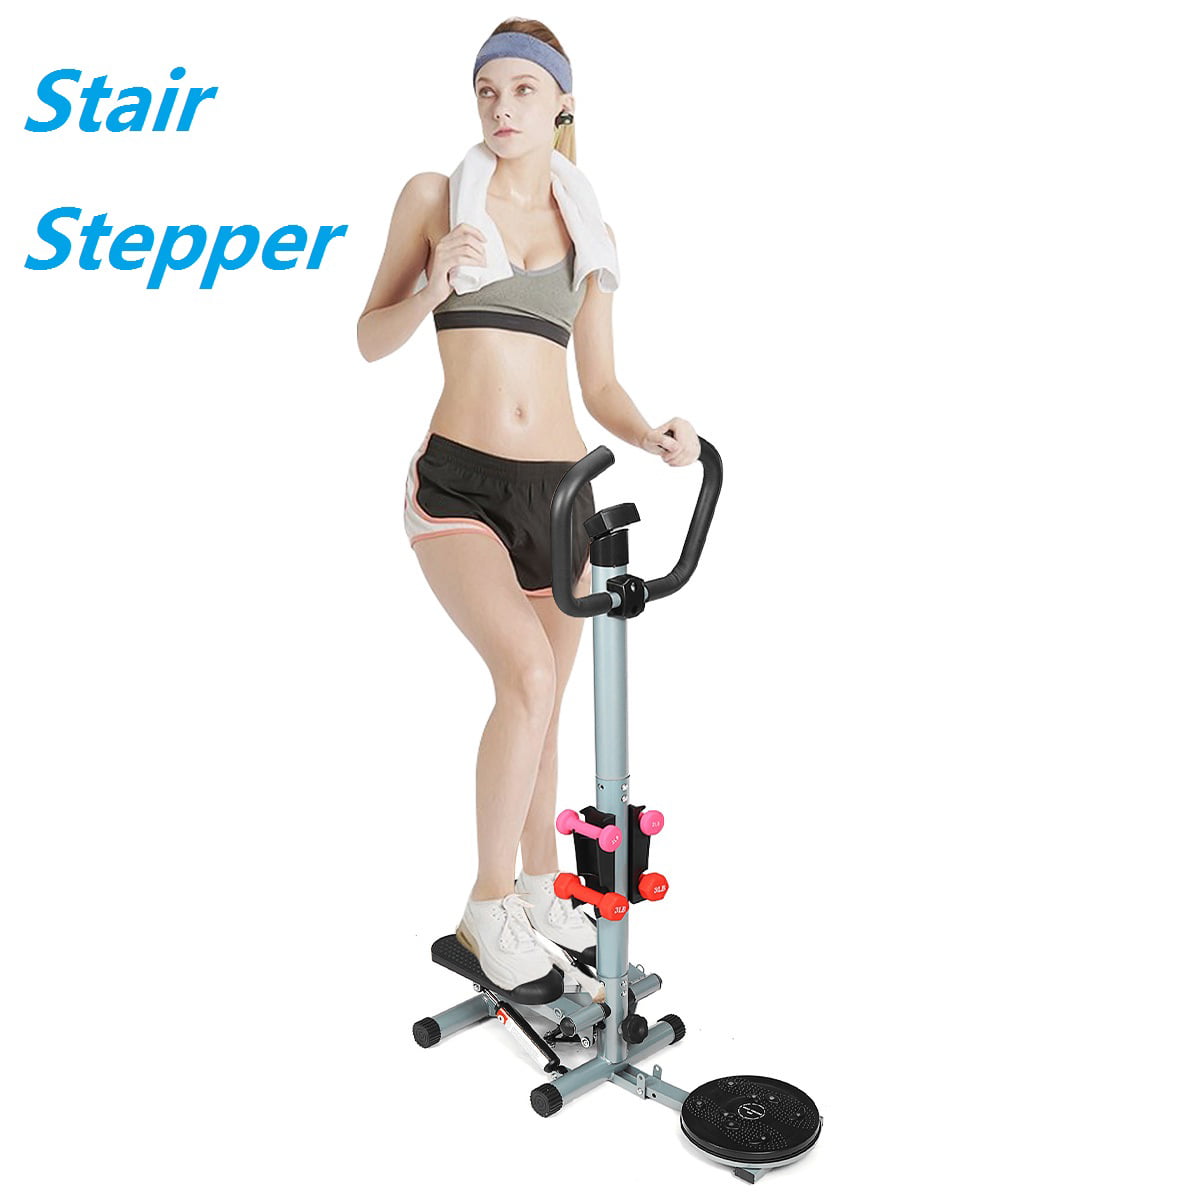 Full Body Fitness Stepper Cardio Twister Home Exercise Training System 